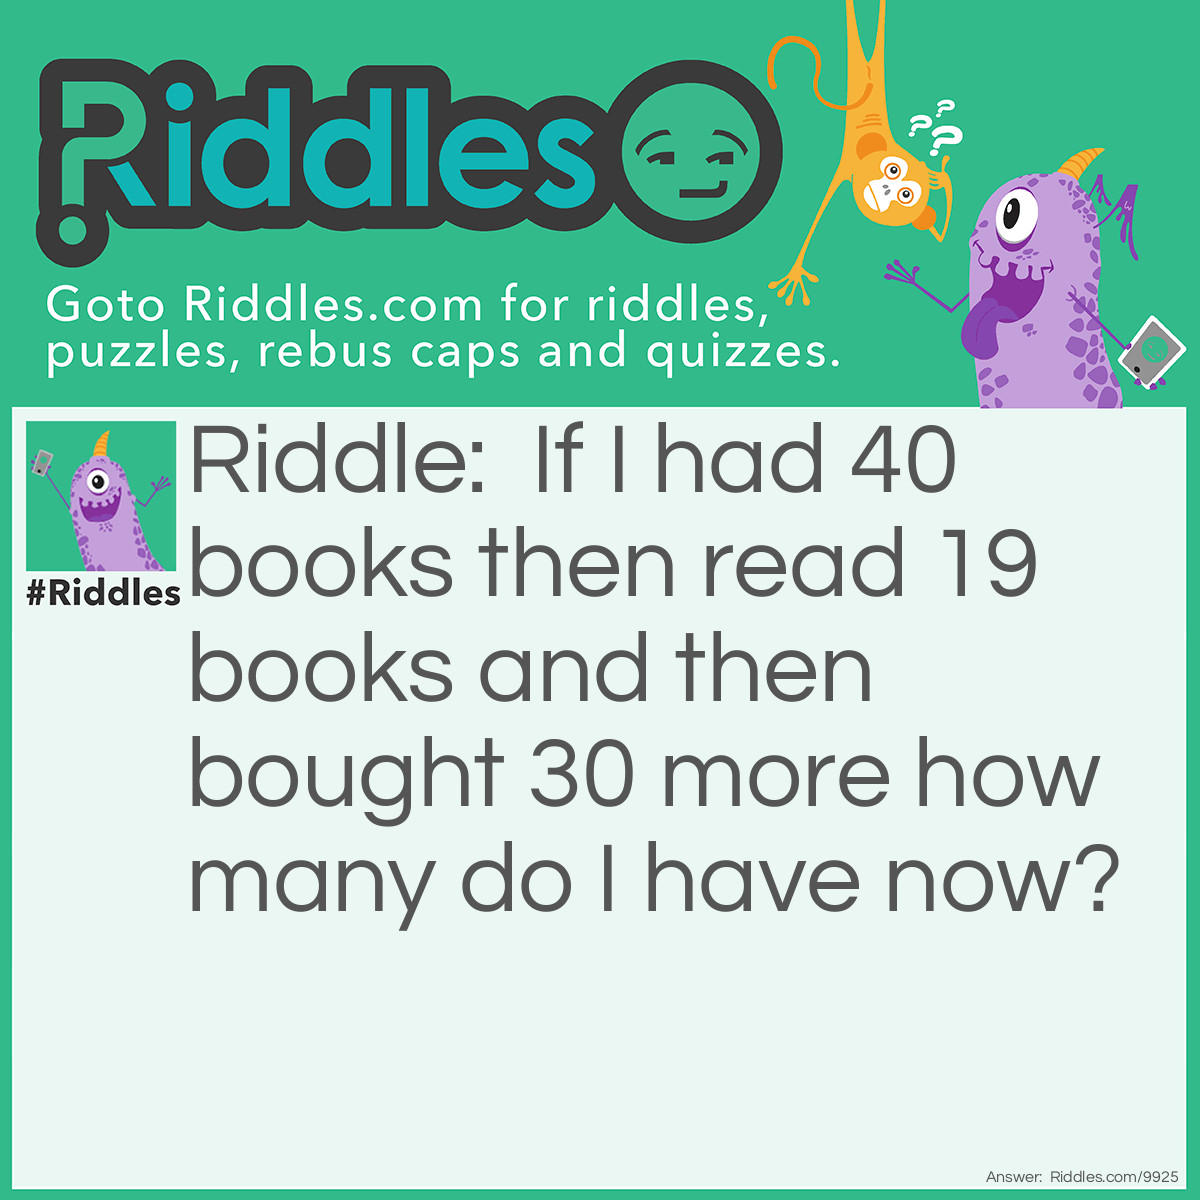 Riddle: If I had 40 books then read 19 books and then bought 30 more how many do I have now? Answer: 89 because the ones that I read I did not sell them!